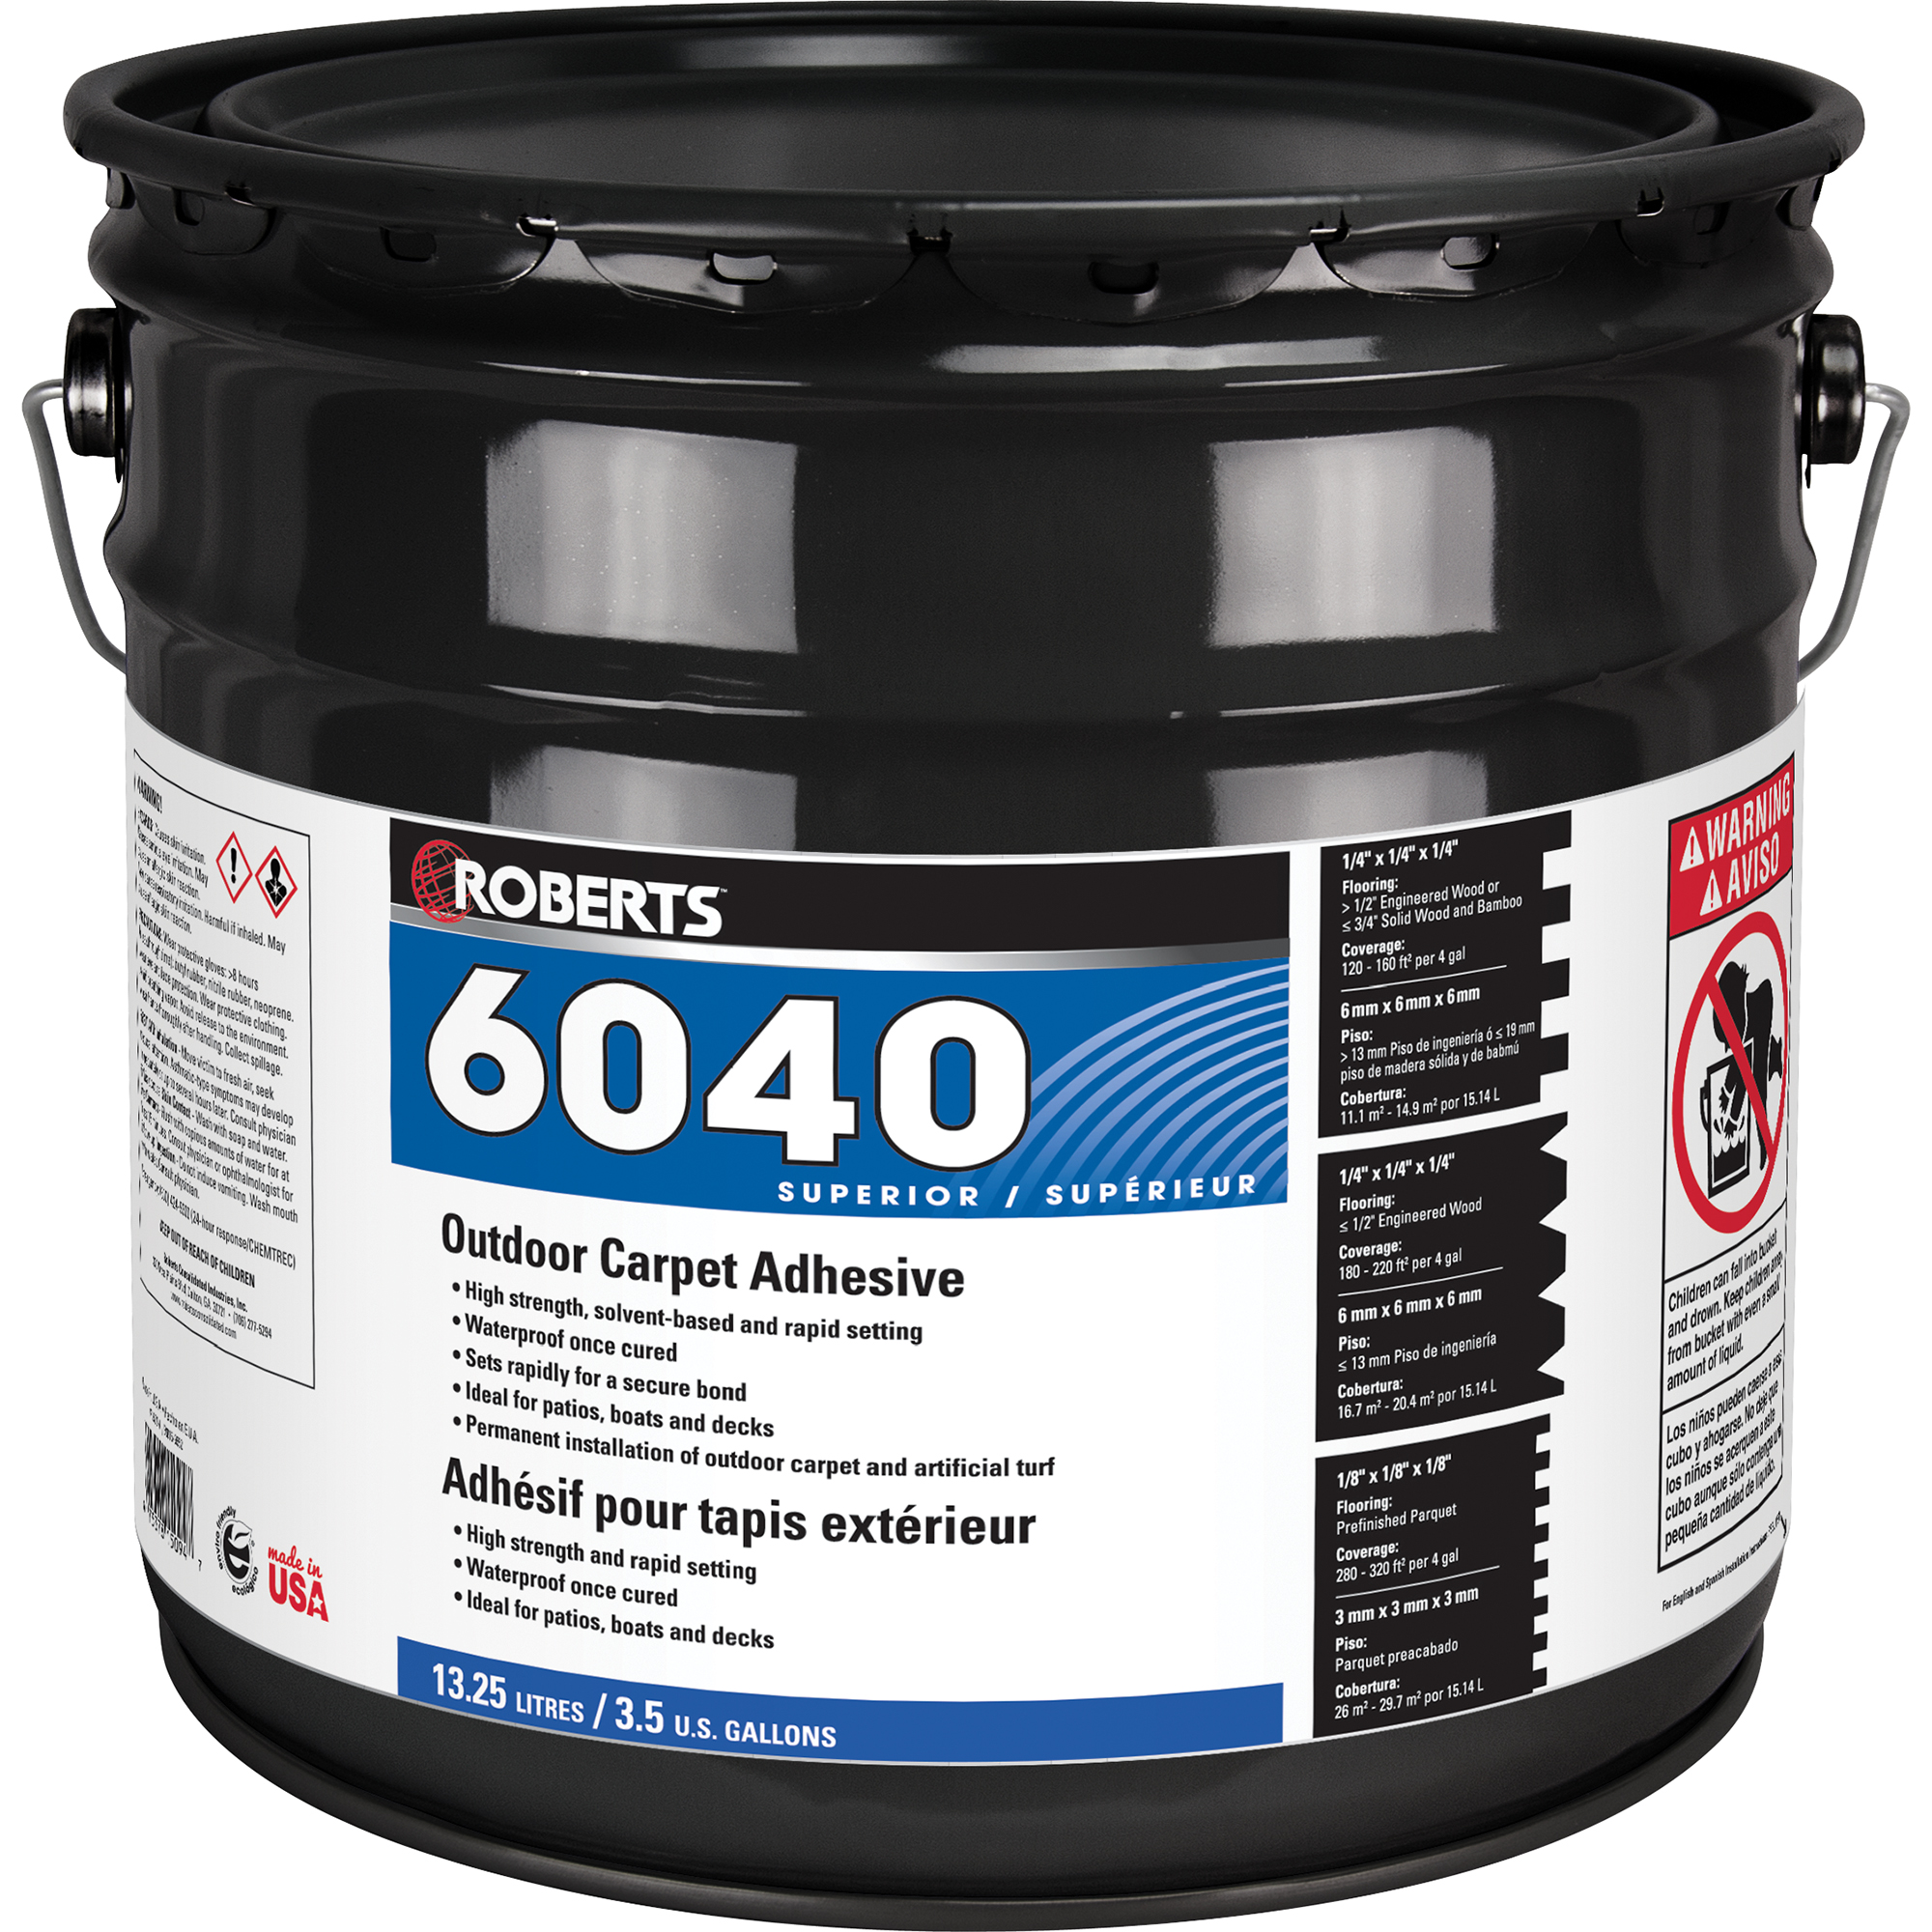 (DISCONTINUED)Outdoor Carpet Adhesive